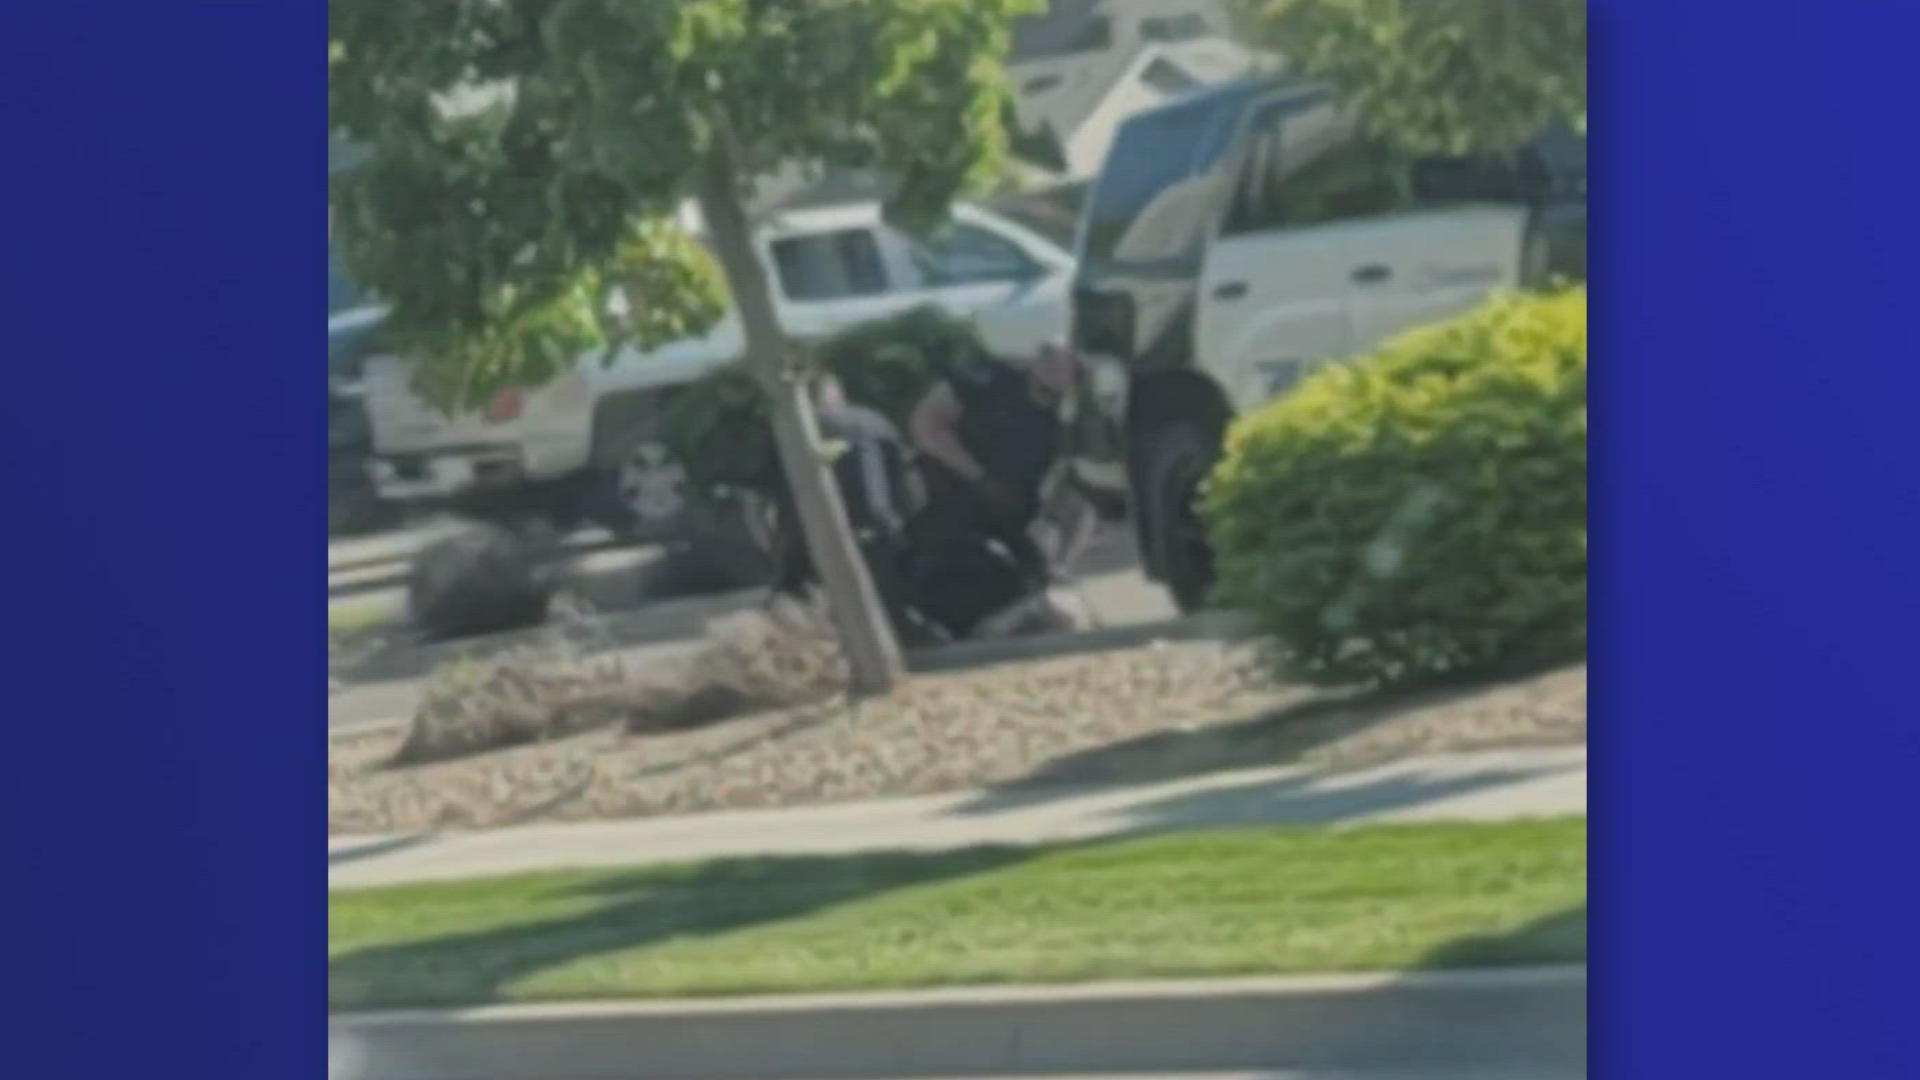 Video shows an officer repeatedly punching a suspect while they were on the ground. Police said the suspect was violent and struck one of the officers.